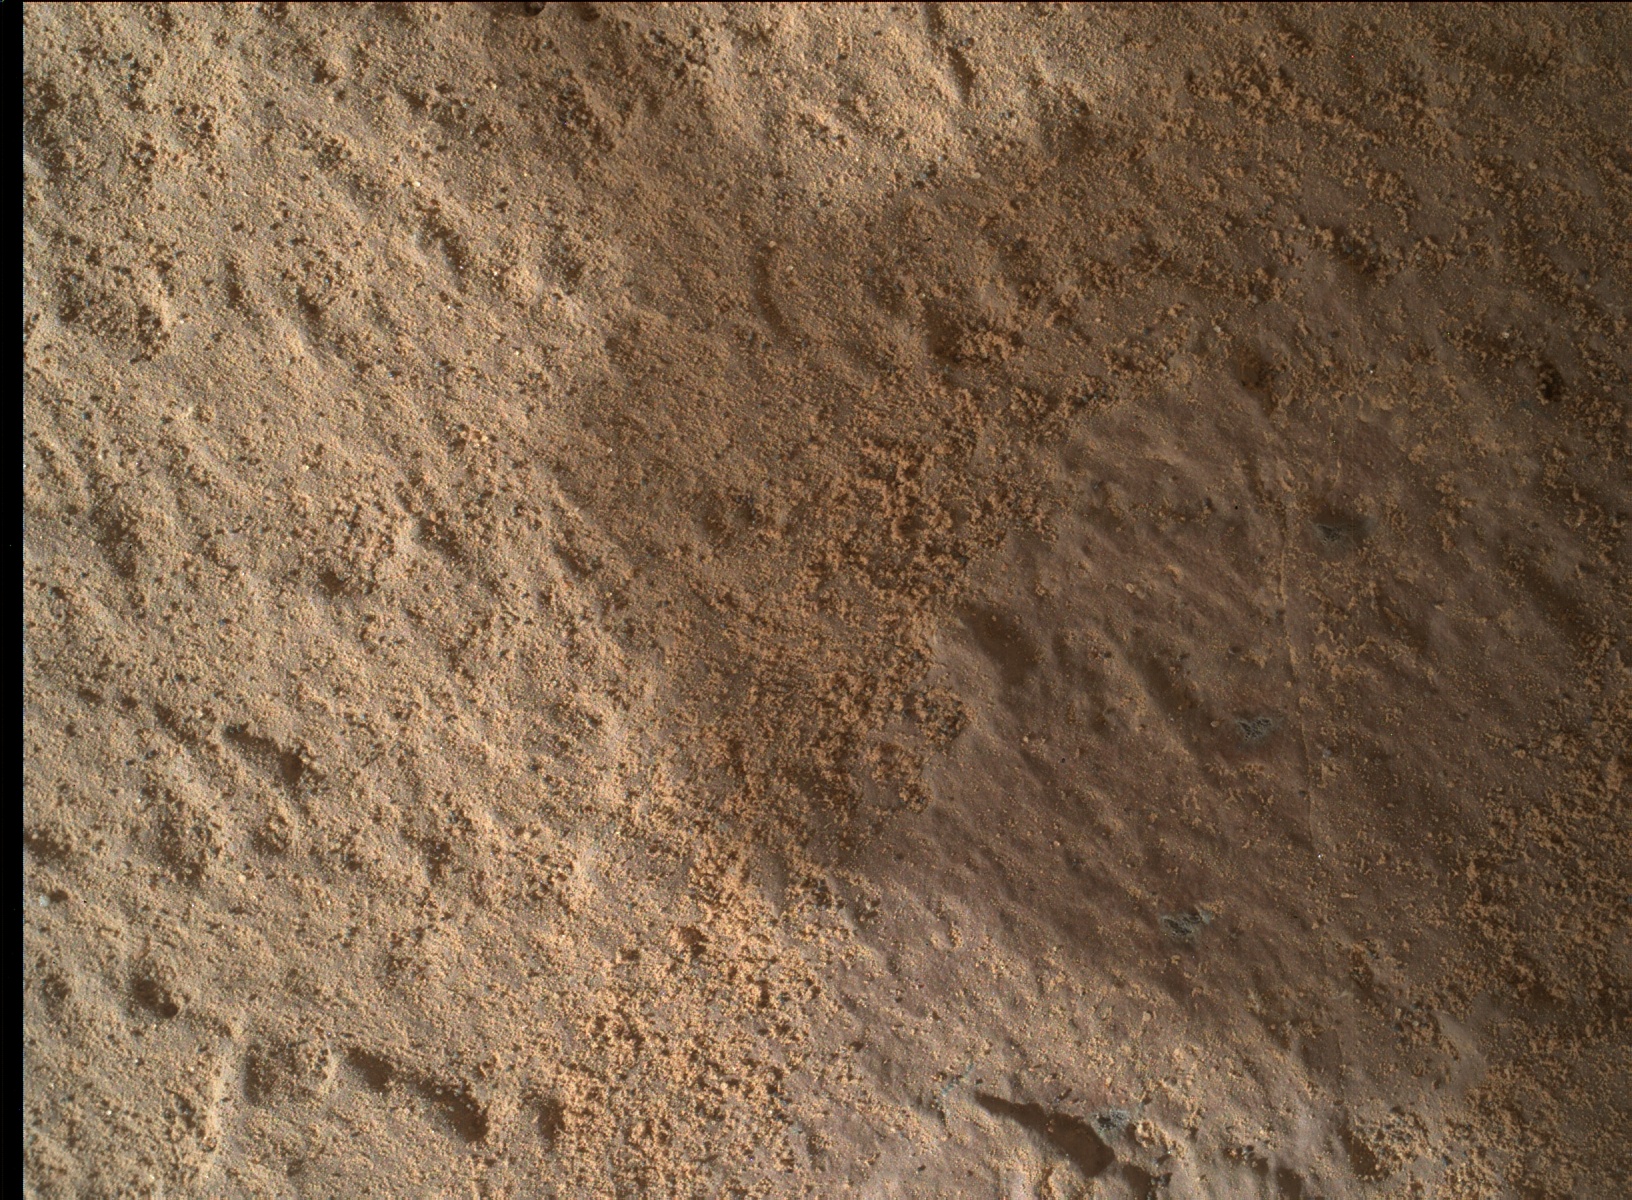 Nasa's Mars rover Curiosity acquired this image using its Mars Hand Lens Imager (MAHLI) on Sol 1416